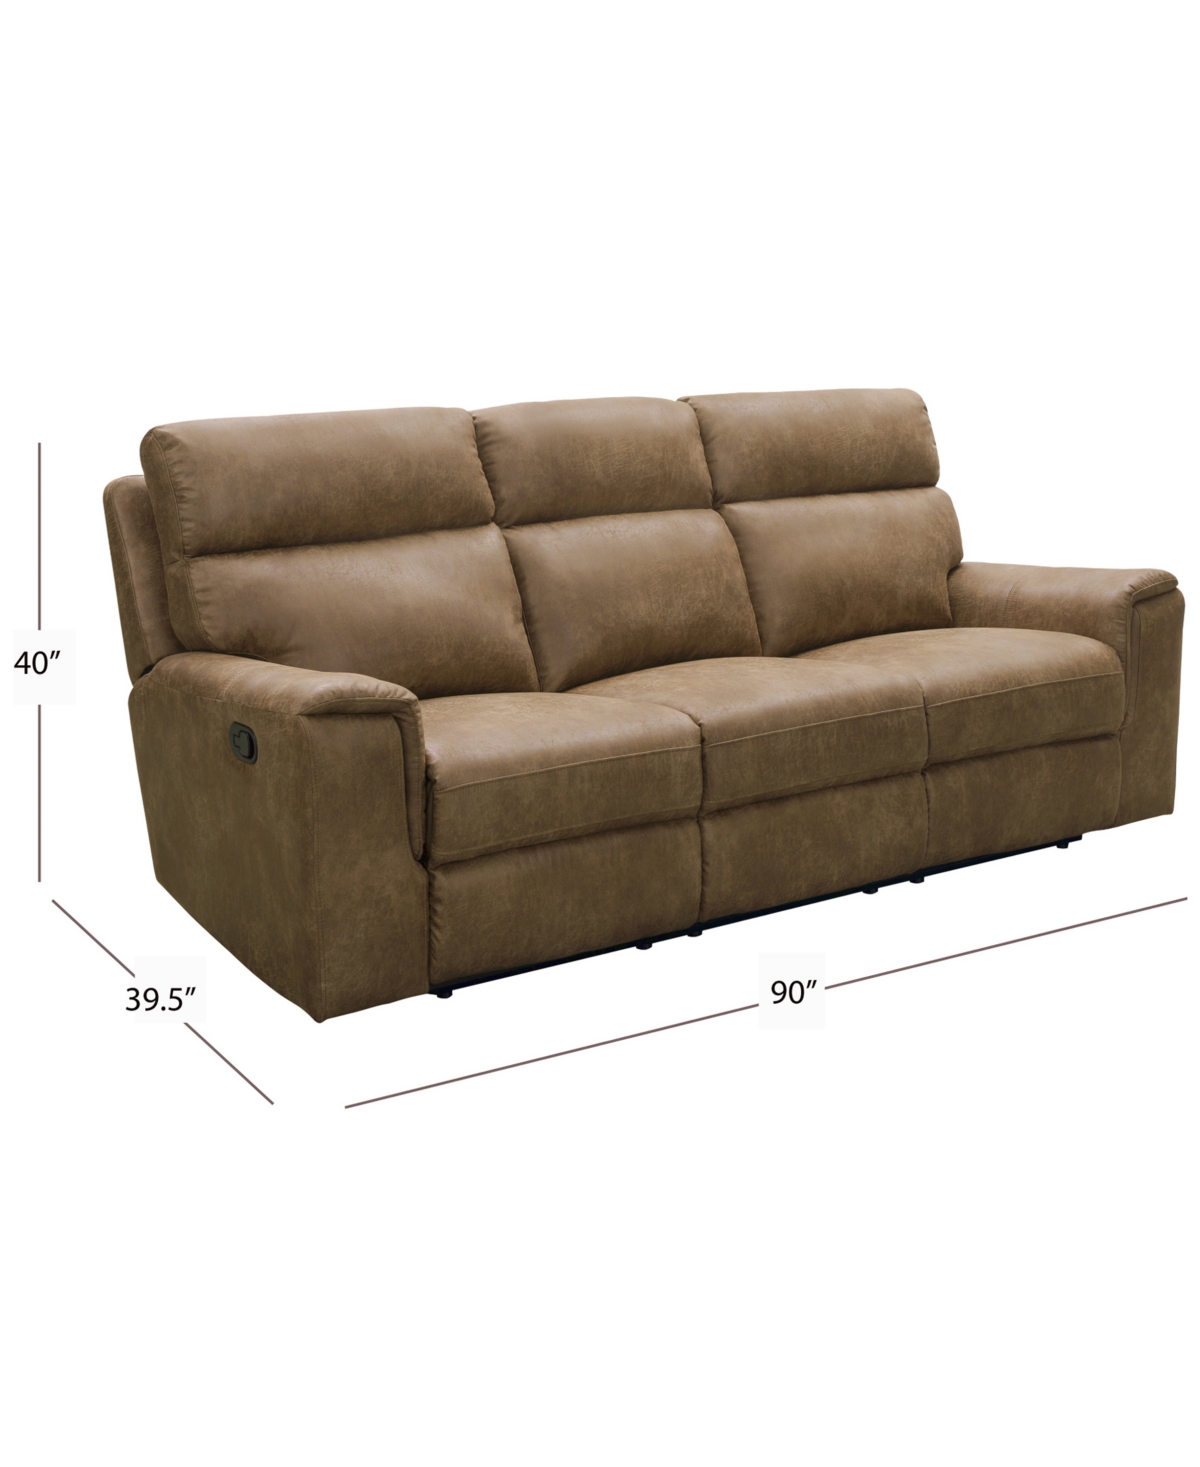 Shop Abbyson Living Lawrence 39.5" Fabric Reclining Sofa In Camel